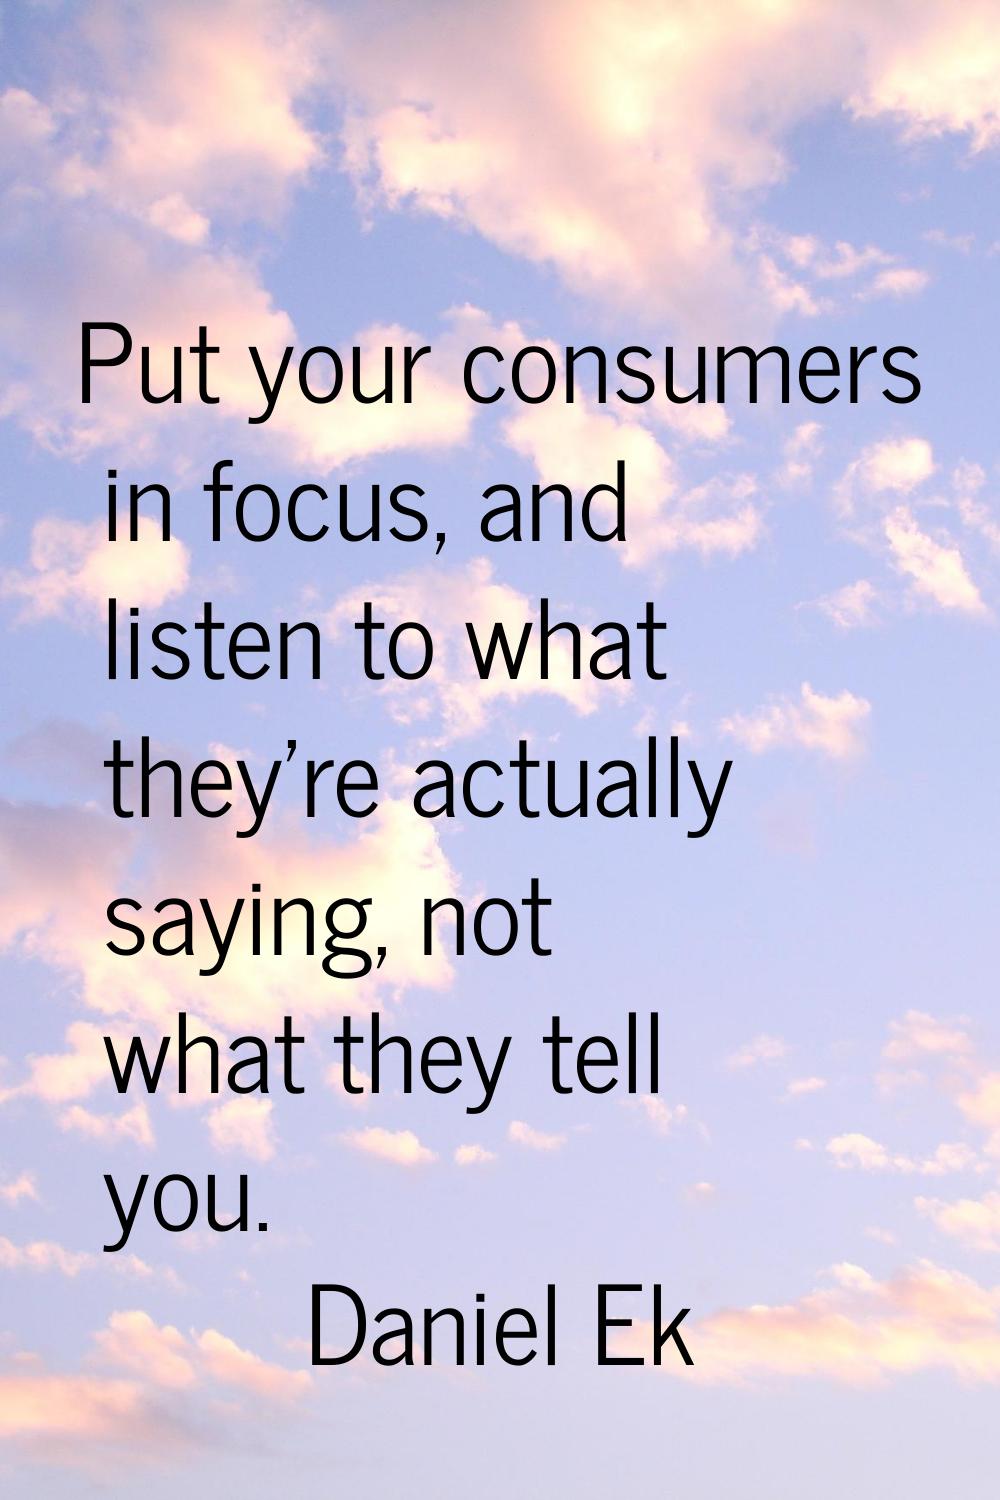 Put your consumers in focus, and listen to what they're actually saying, not what they tell you.